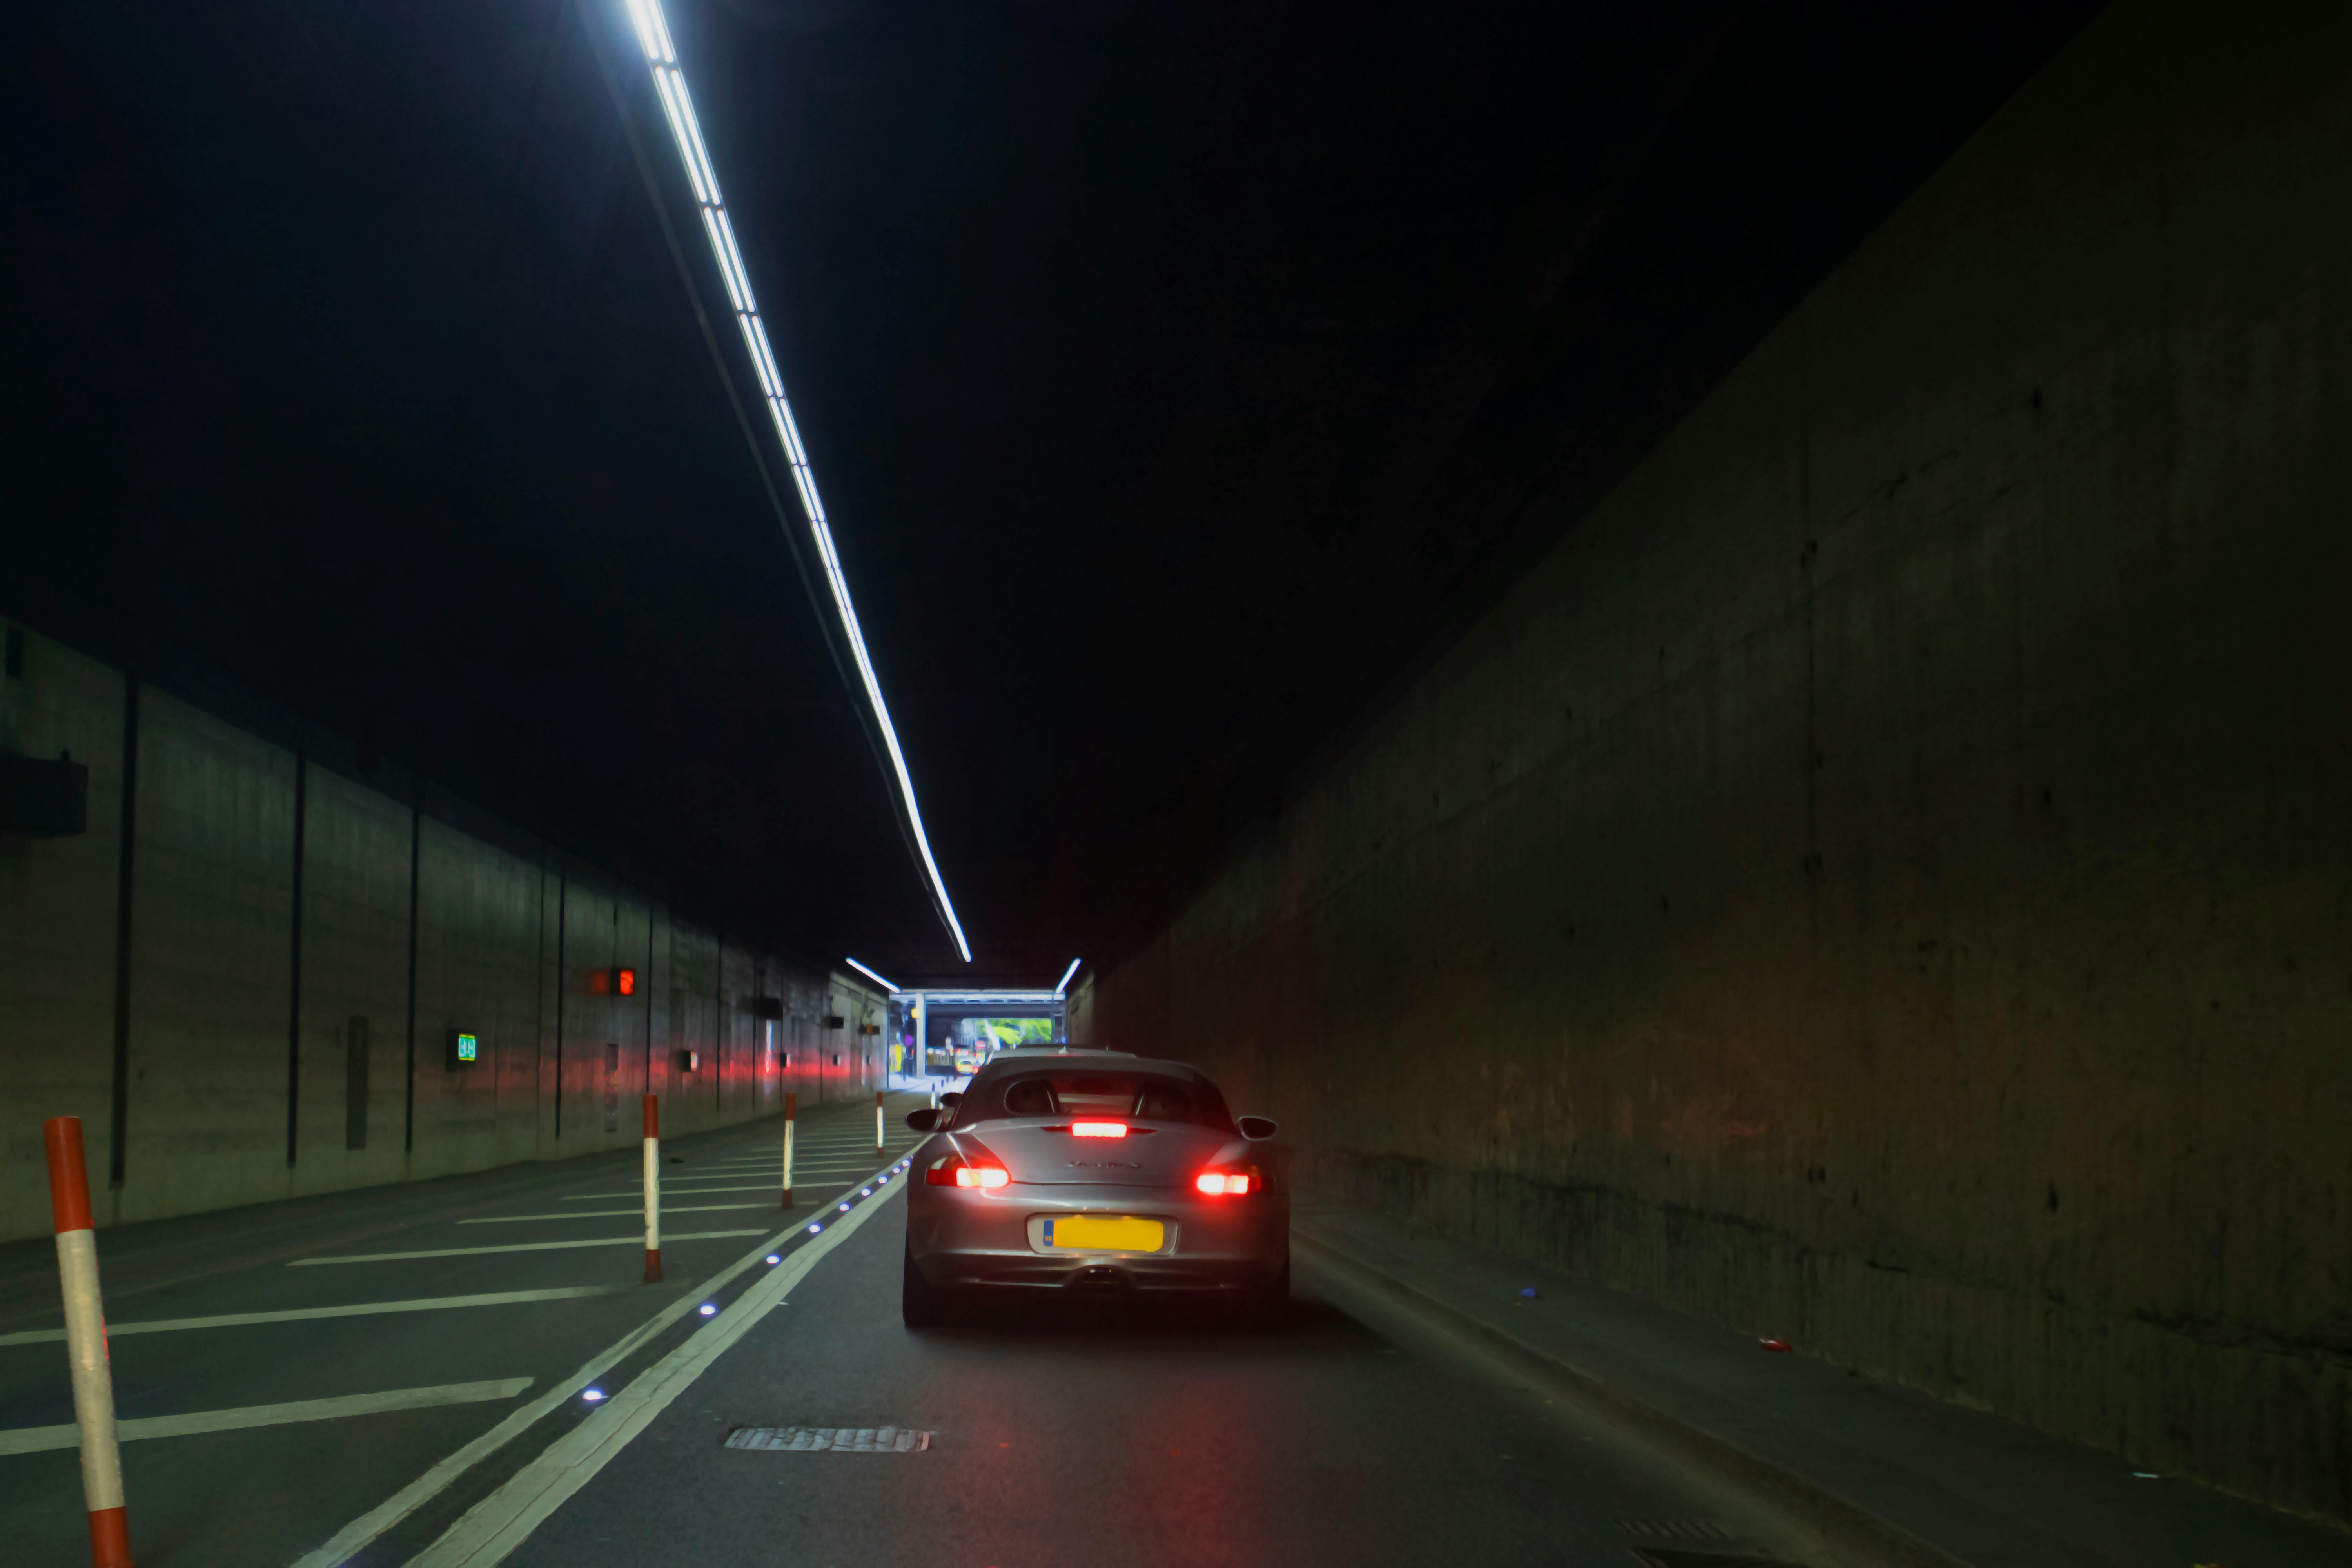 Free stock photo of beautiful car, beauty inside of dark tunnel, light in the tunnel